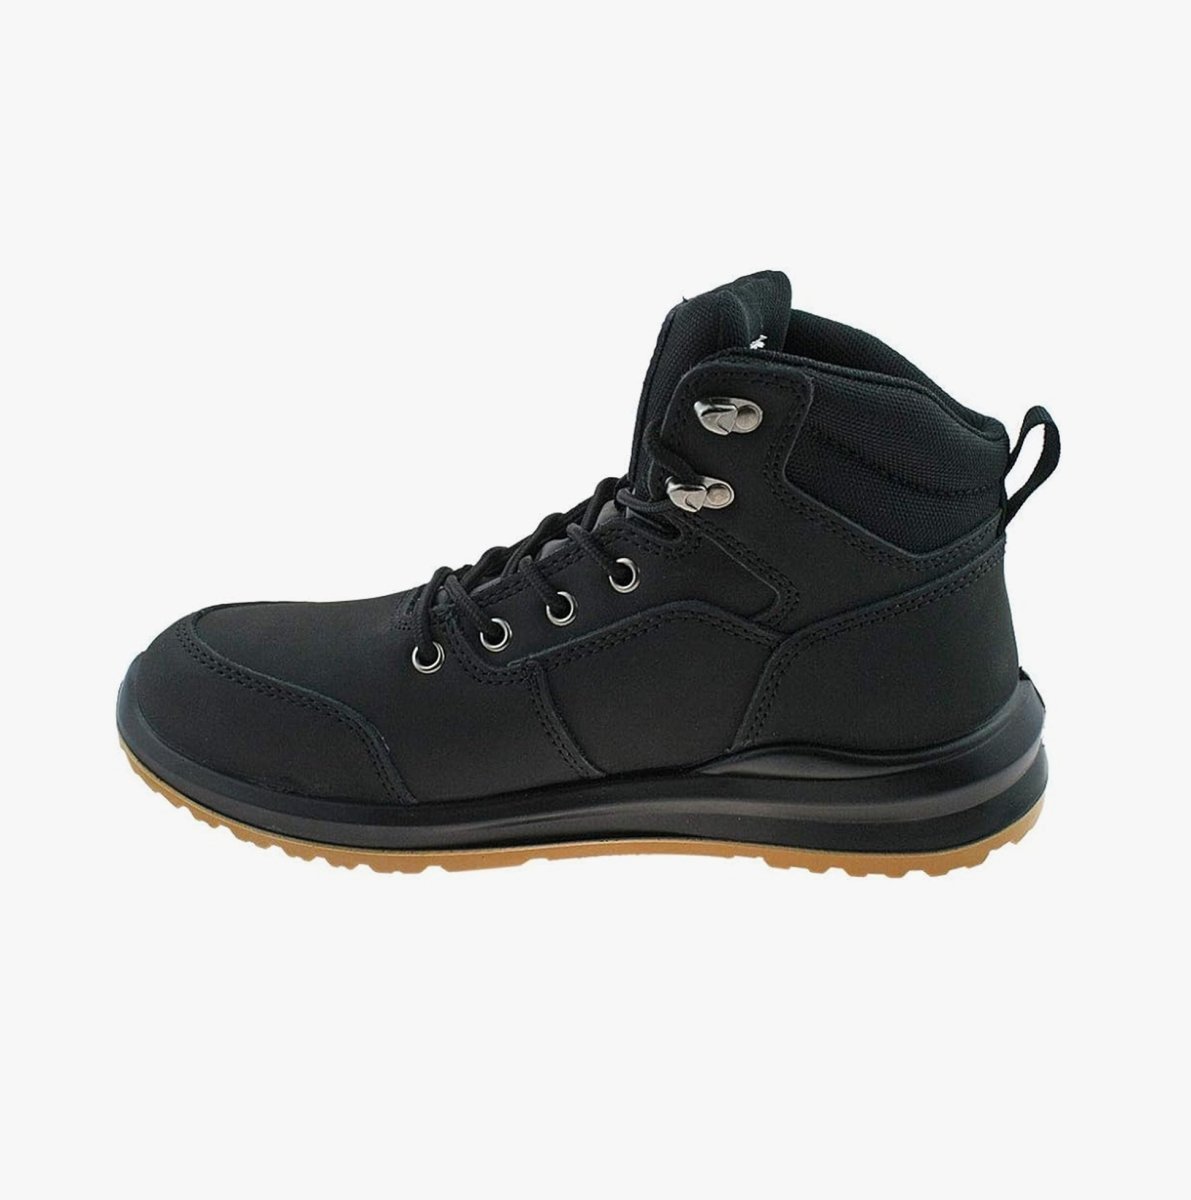 Grafters M513A Unisex Nubuck Steel Toe Boots Black M513A - 36 | STB.co.uk